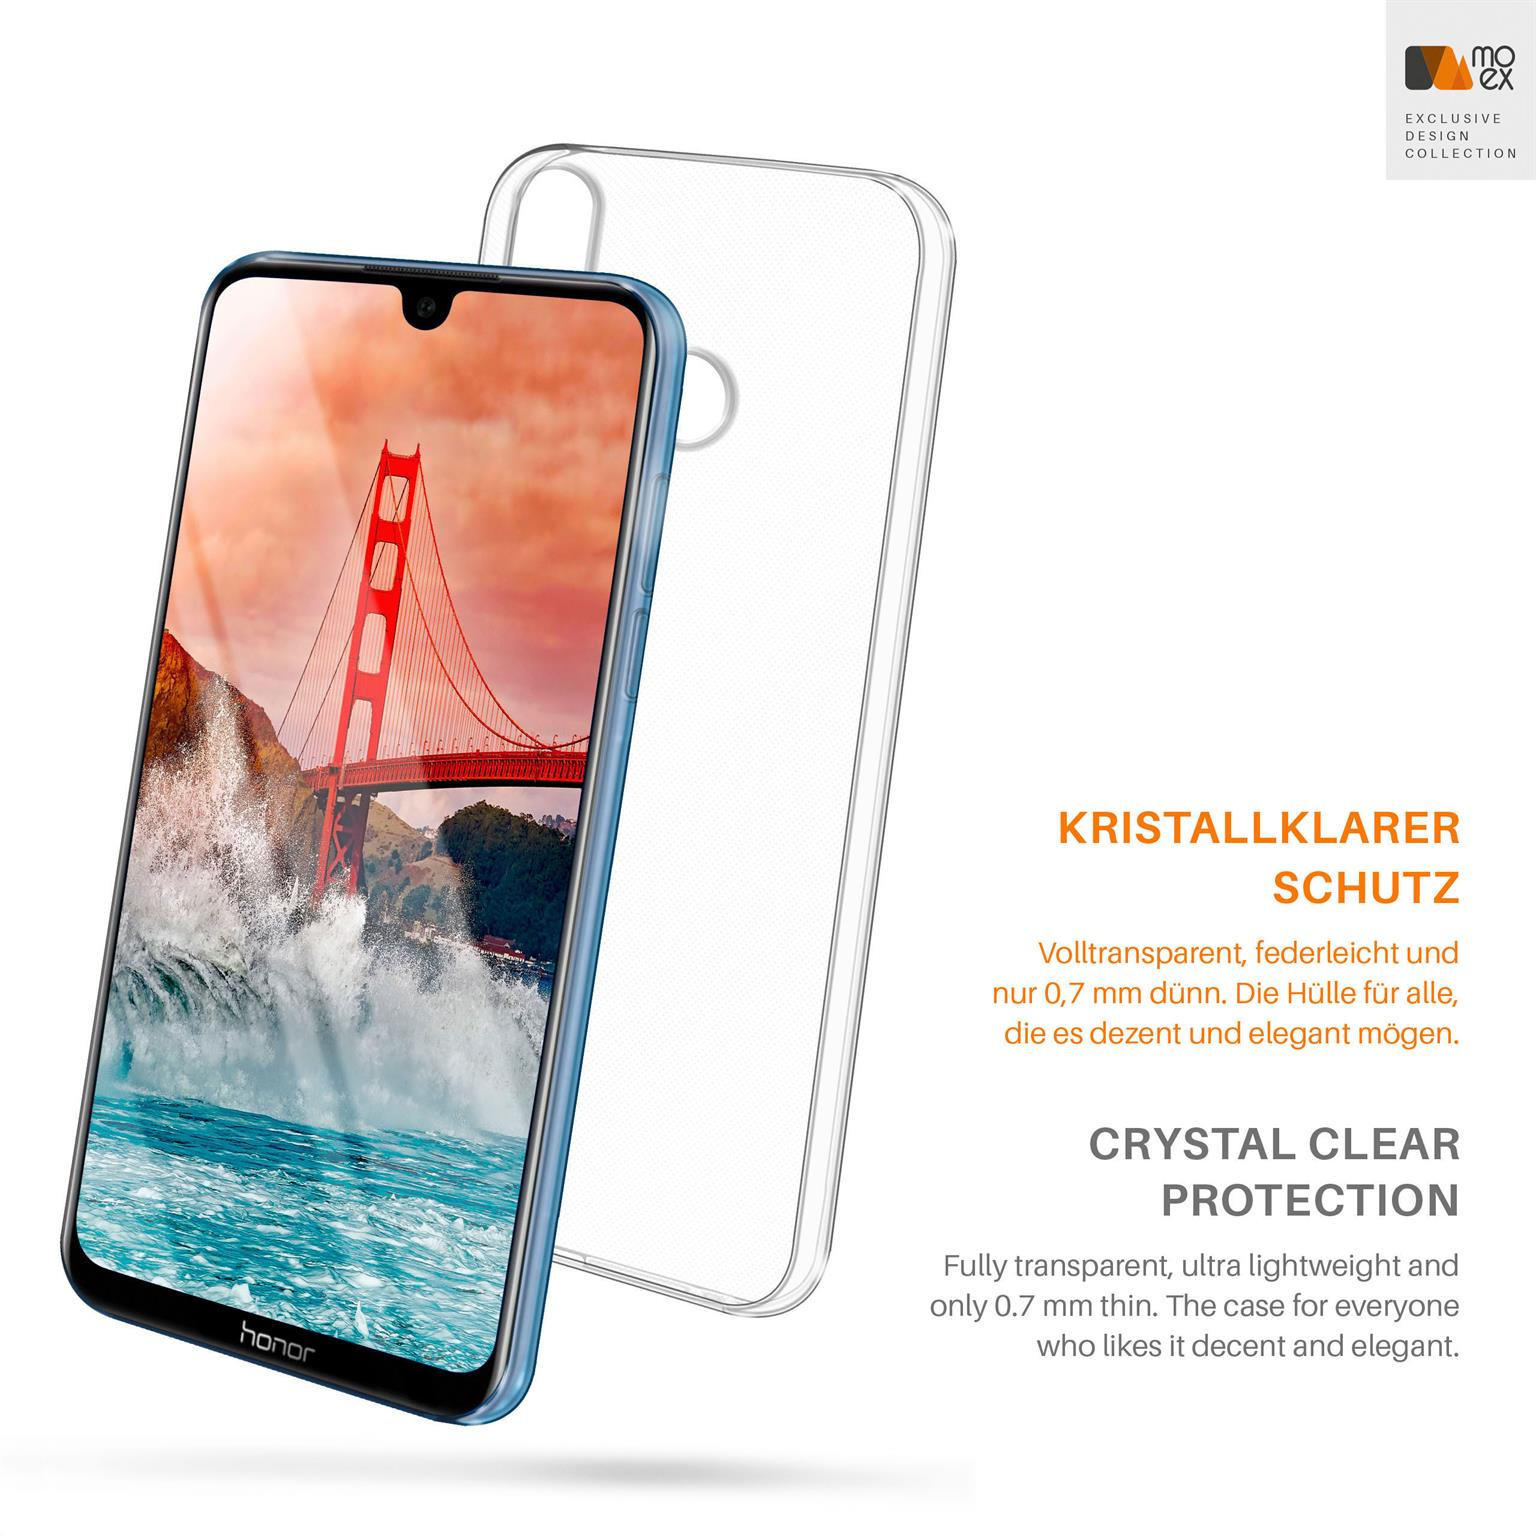 MOEX Aero Case, Backcover, Crystal-Clear Huawei, 8X Max, Honor